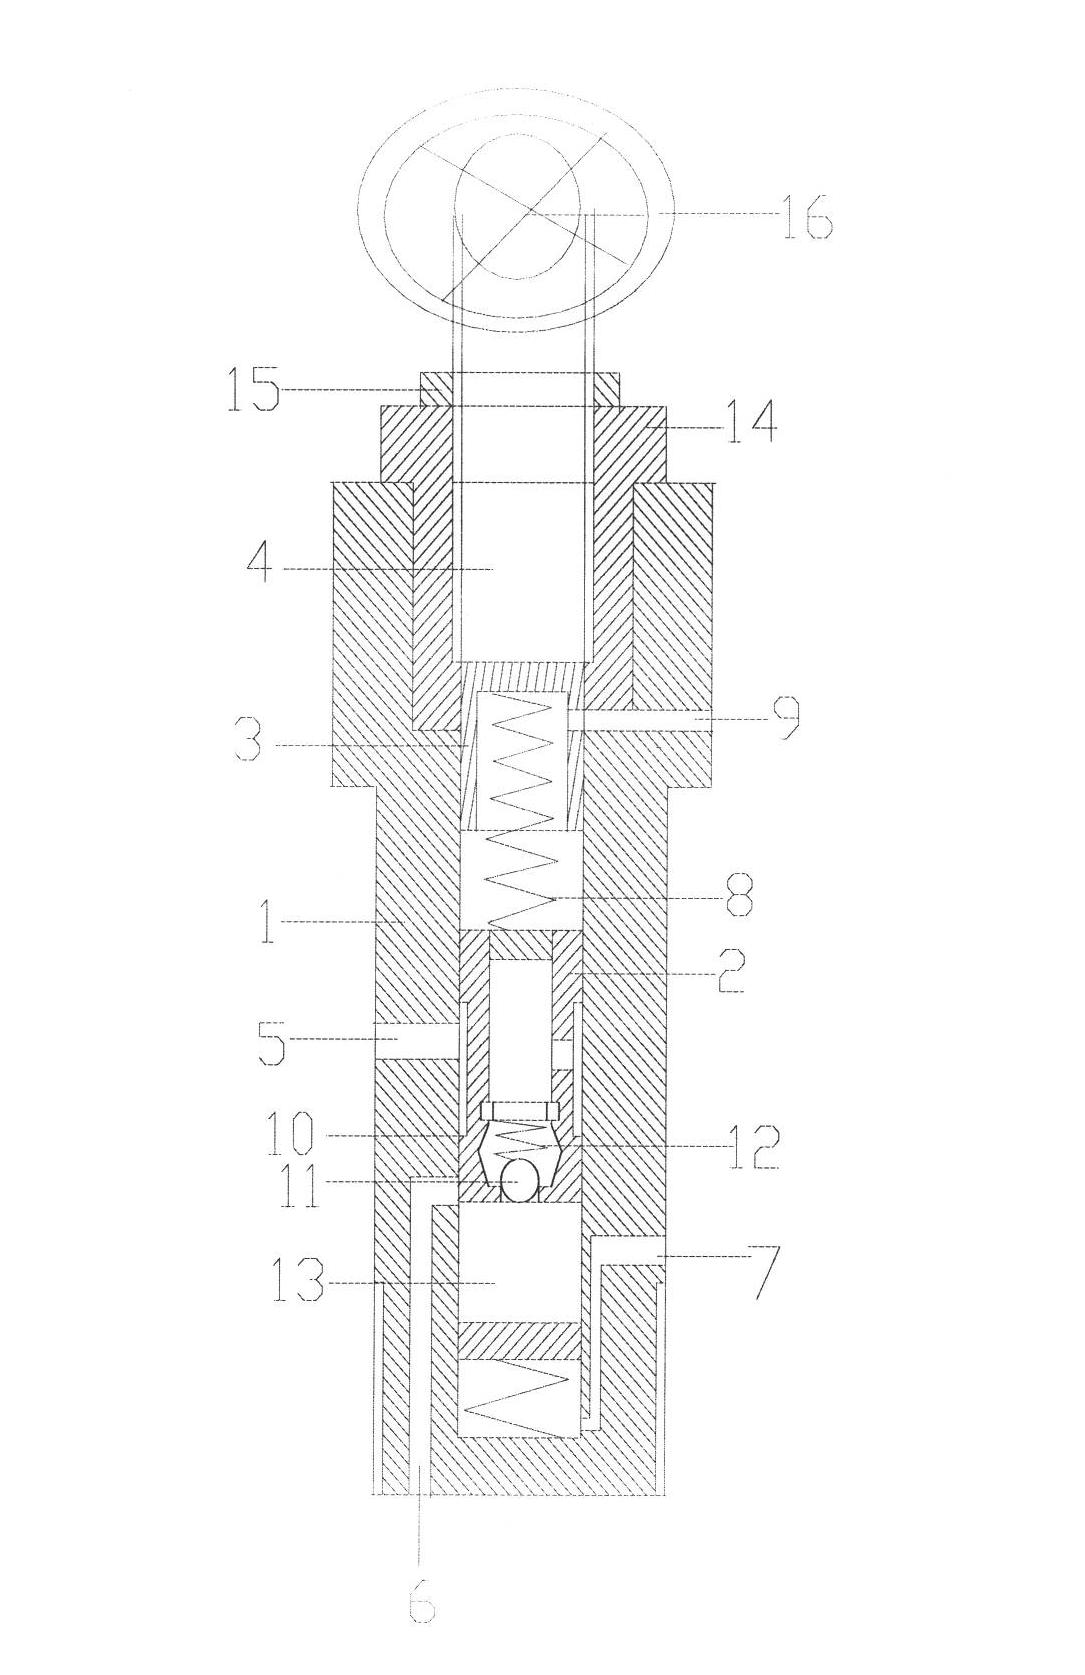 Direct-acting externally piloted one-way sequence valve